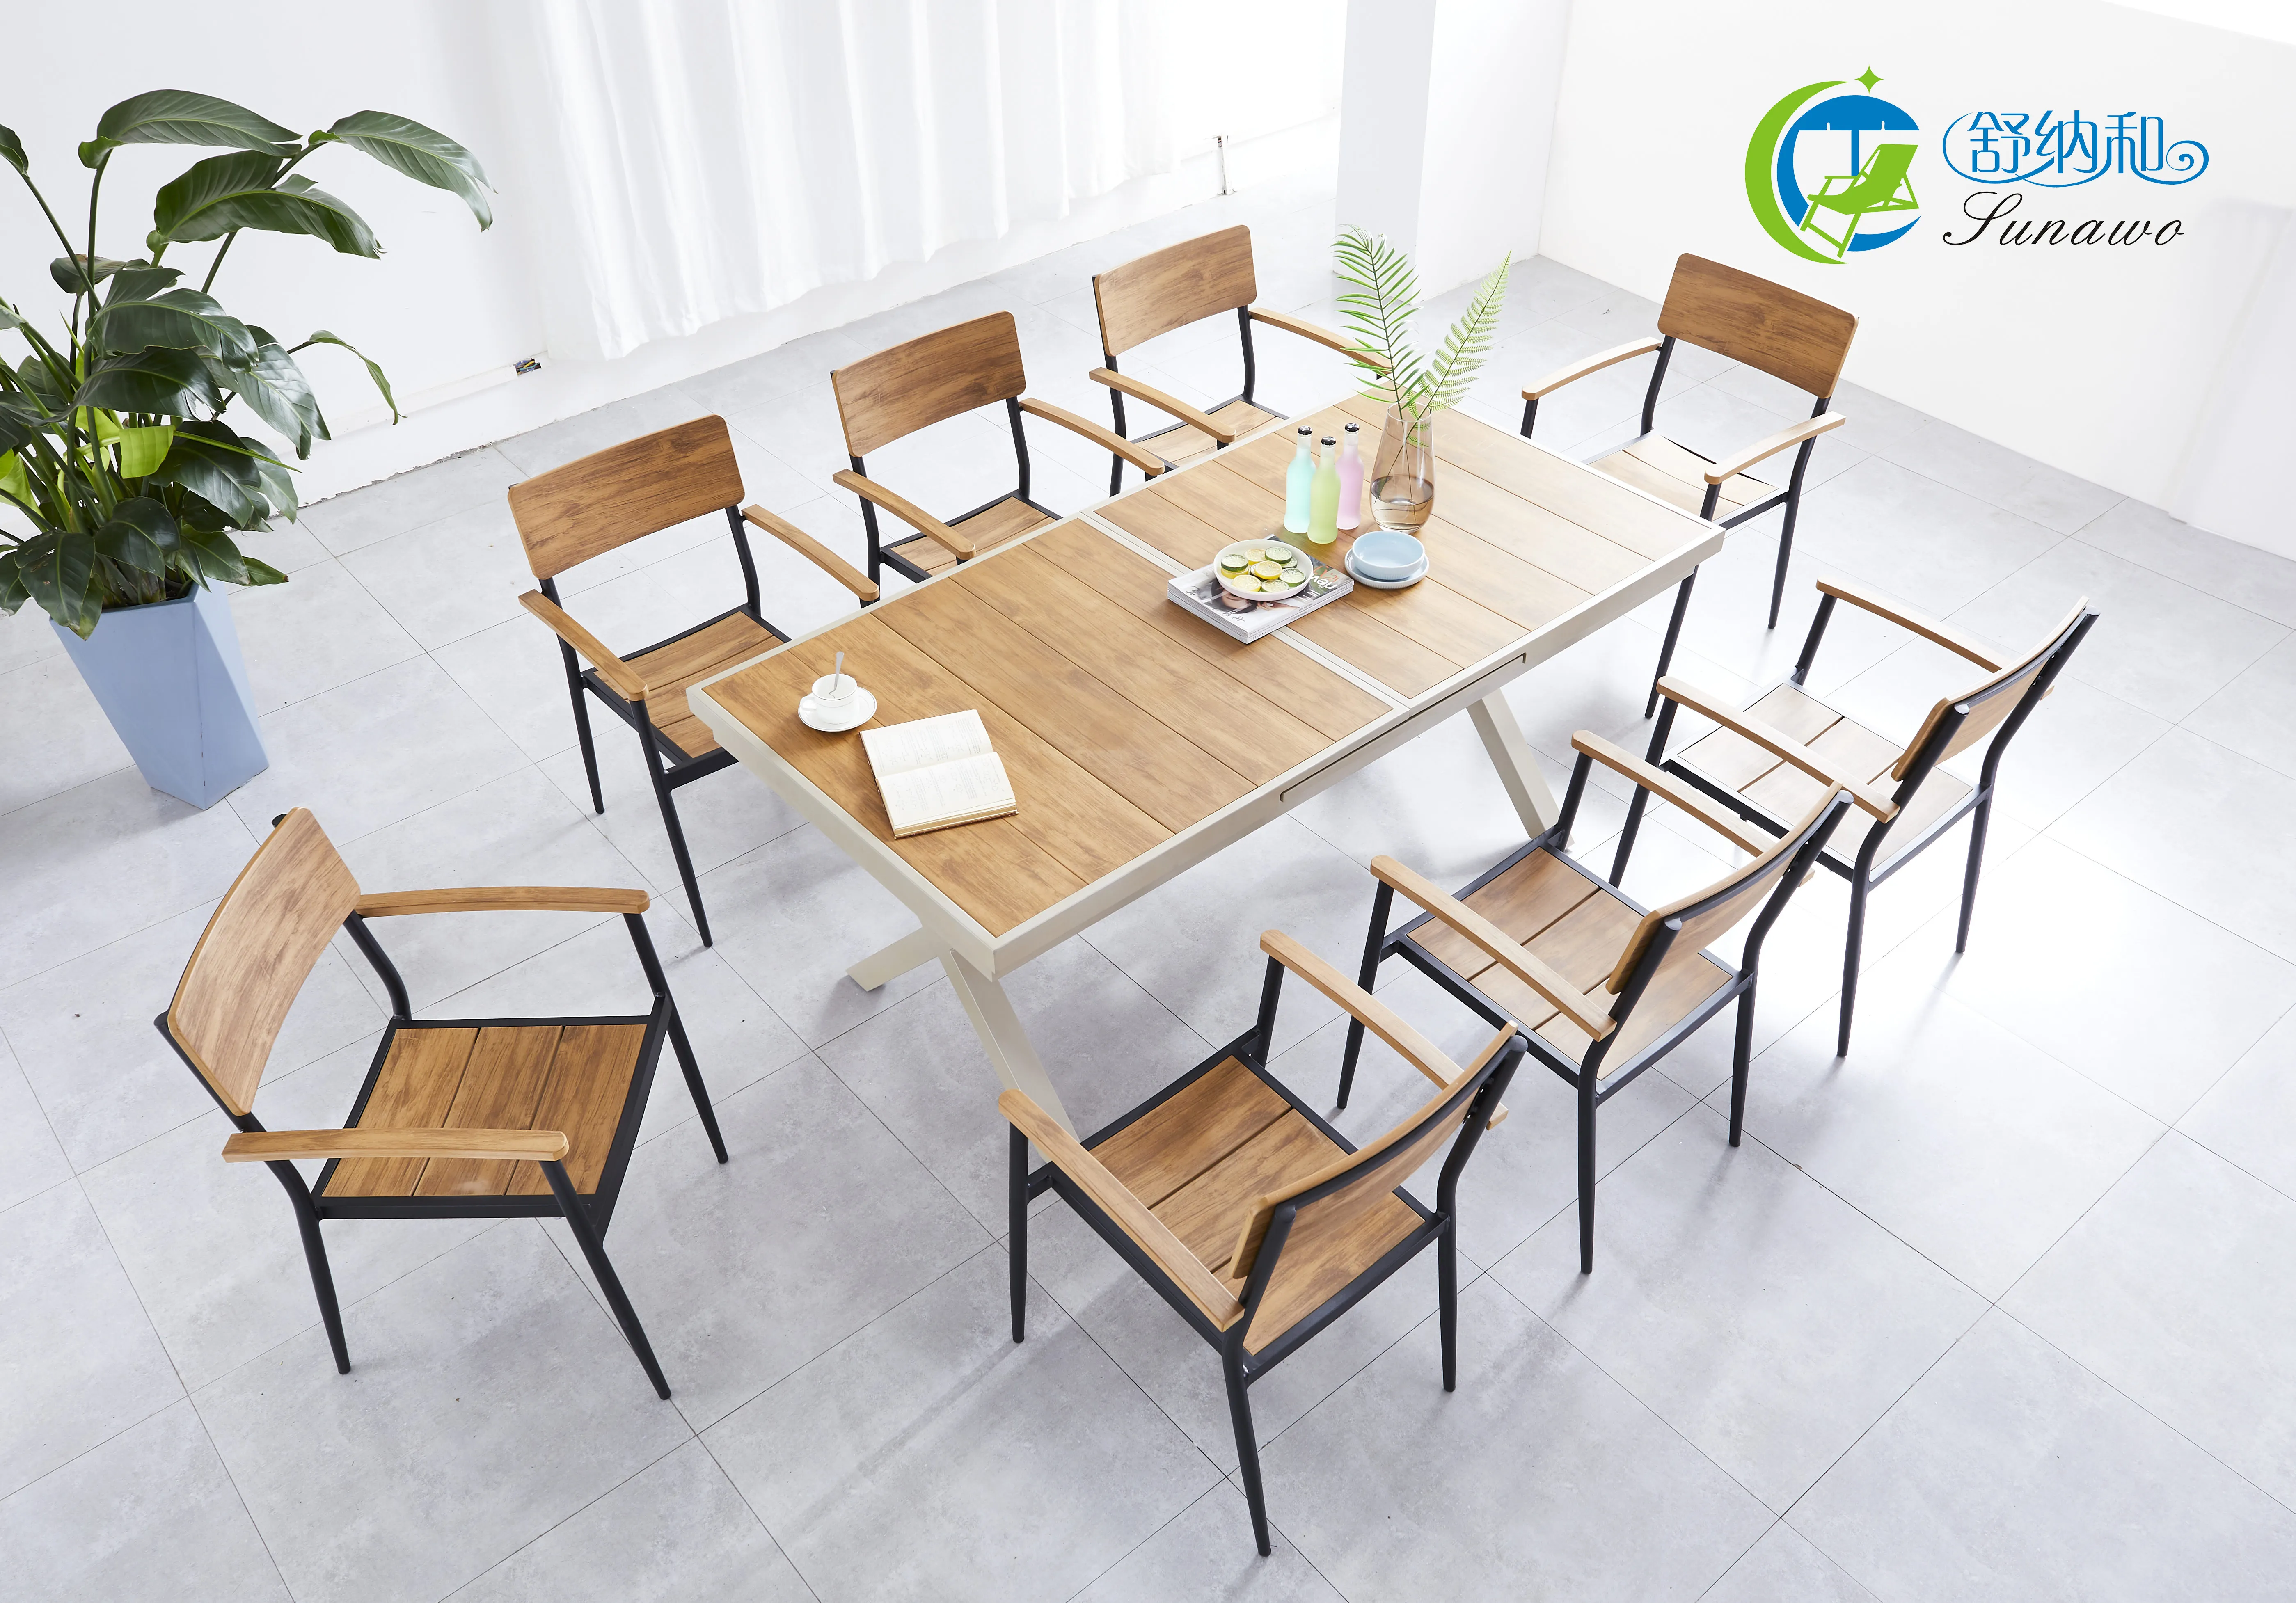 Manufacturers sell retractable plastic wood all-weather outdoor furniture tables